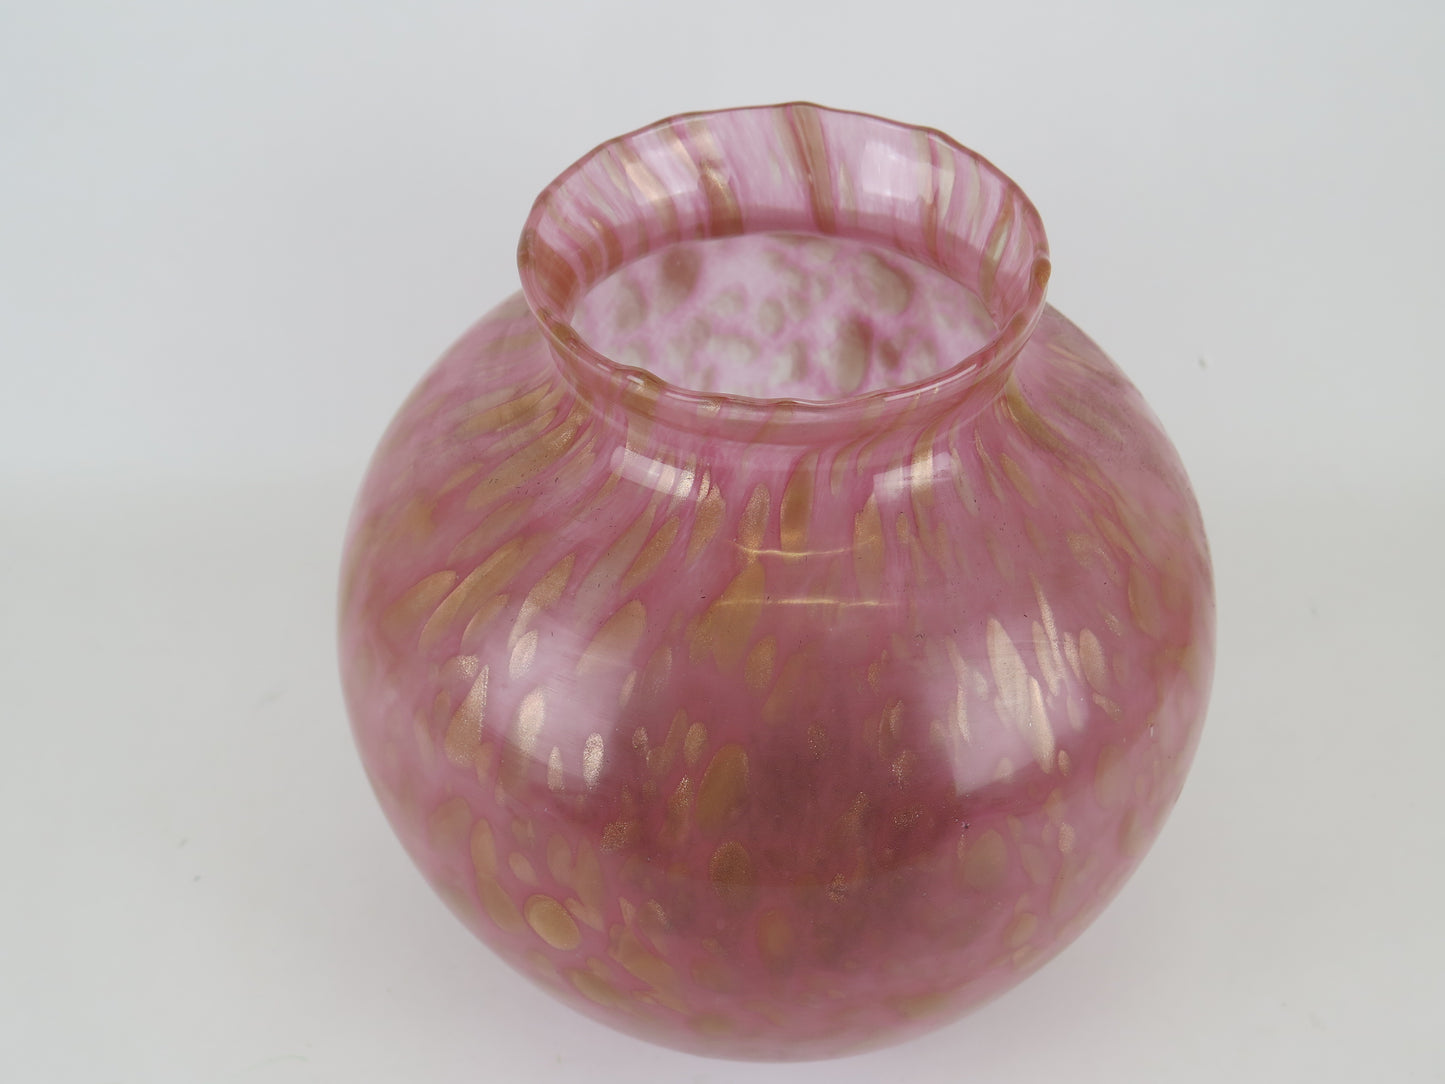 DE WAN TORINO VINTAGE SPOTTED OPAL GLASS VASE COLLECTIBLE VN5